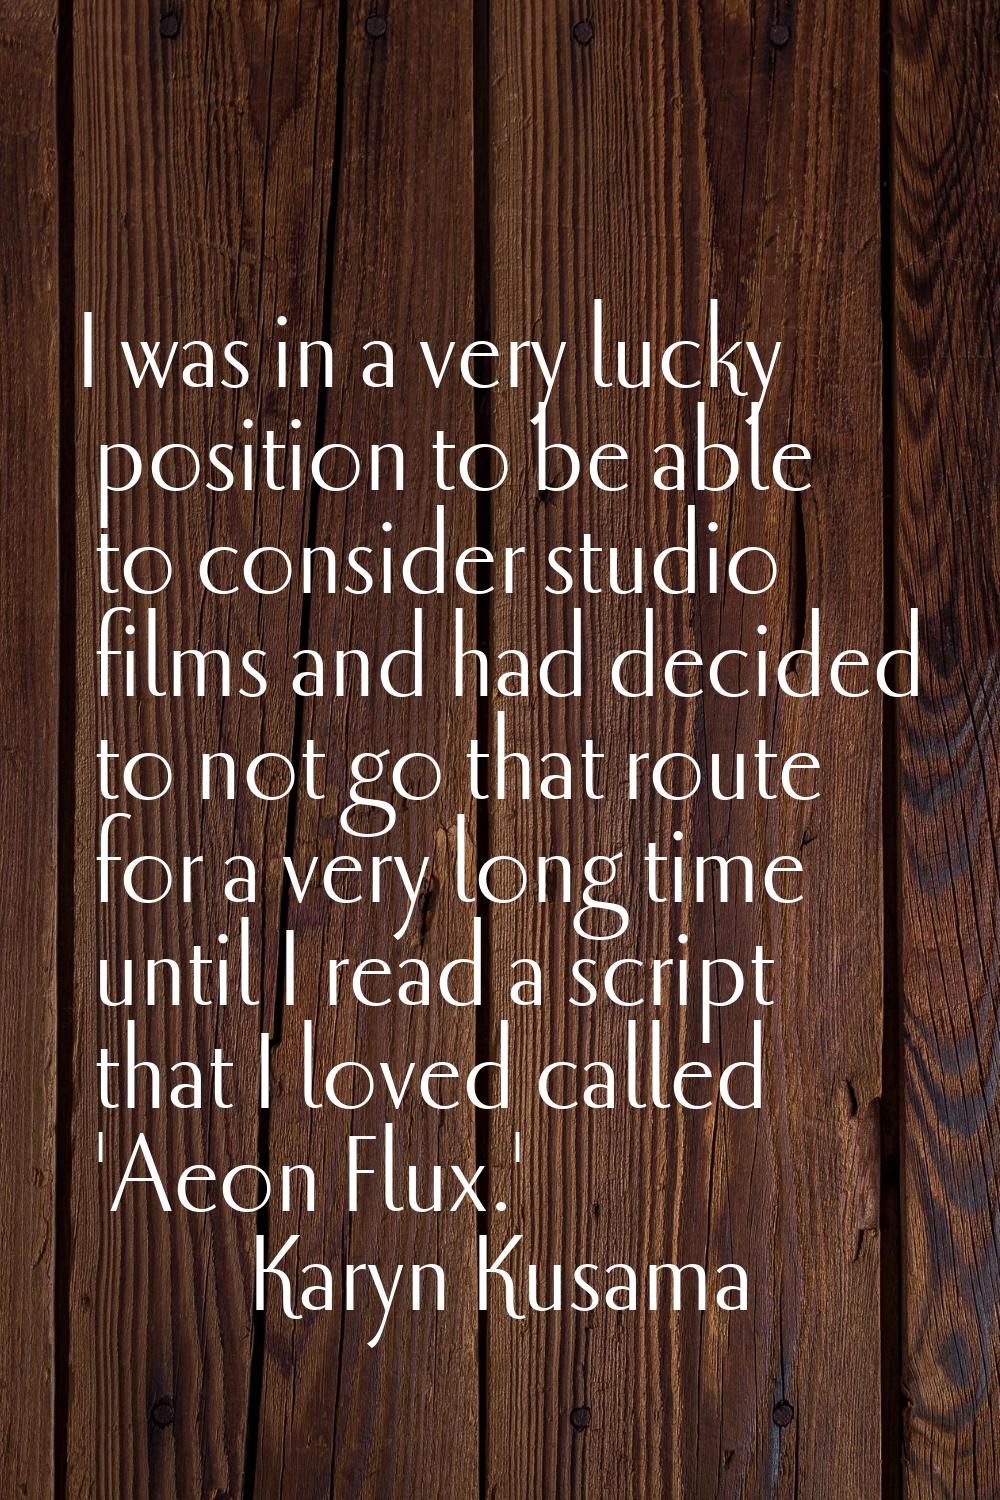 I was in a very lucky position to be able to consider studio films and had decided to not go that r